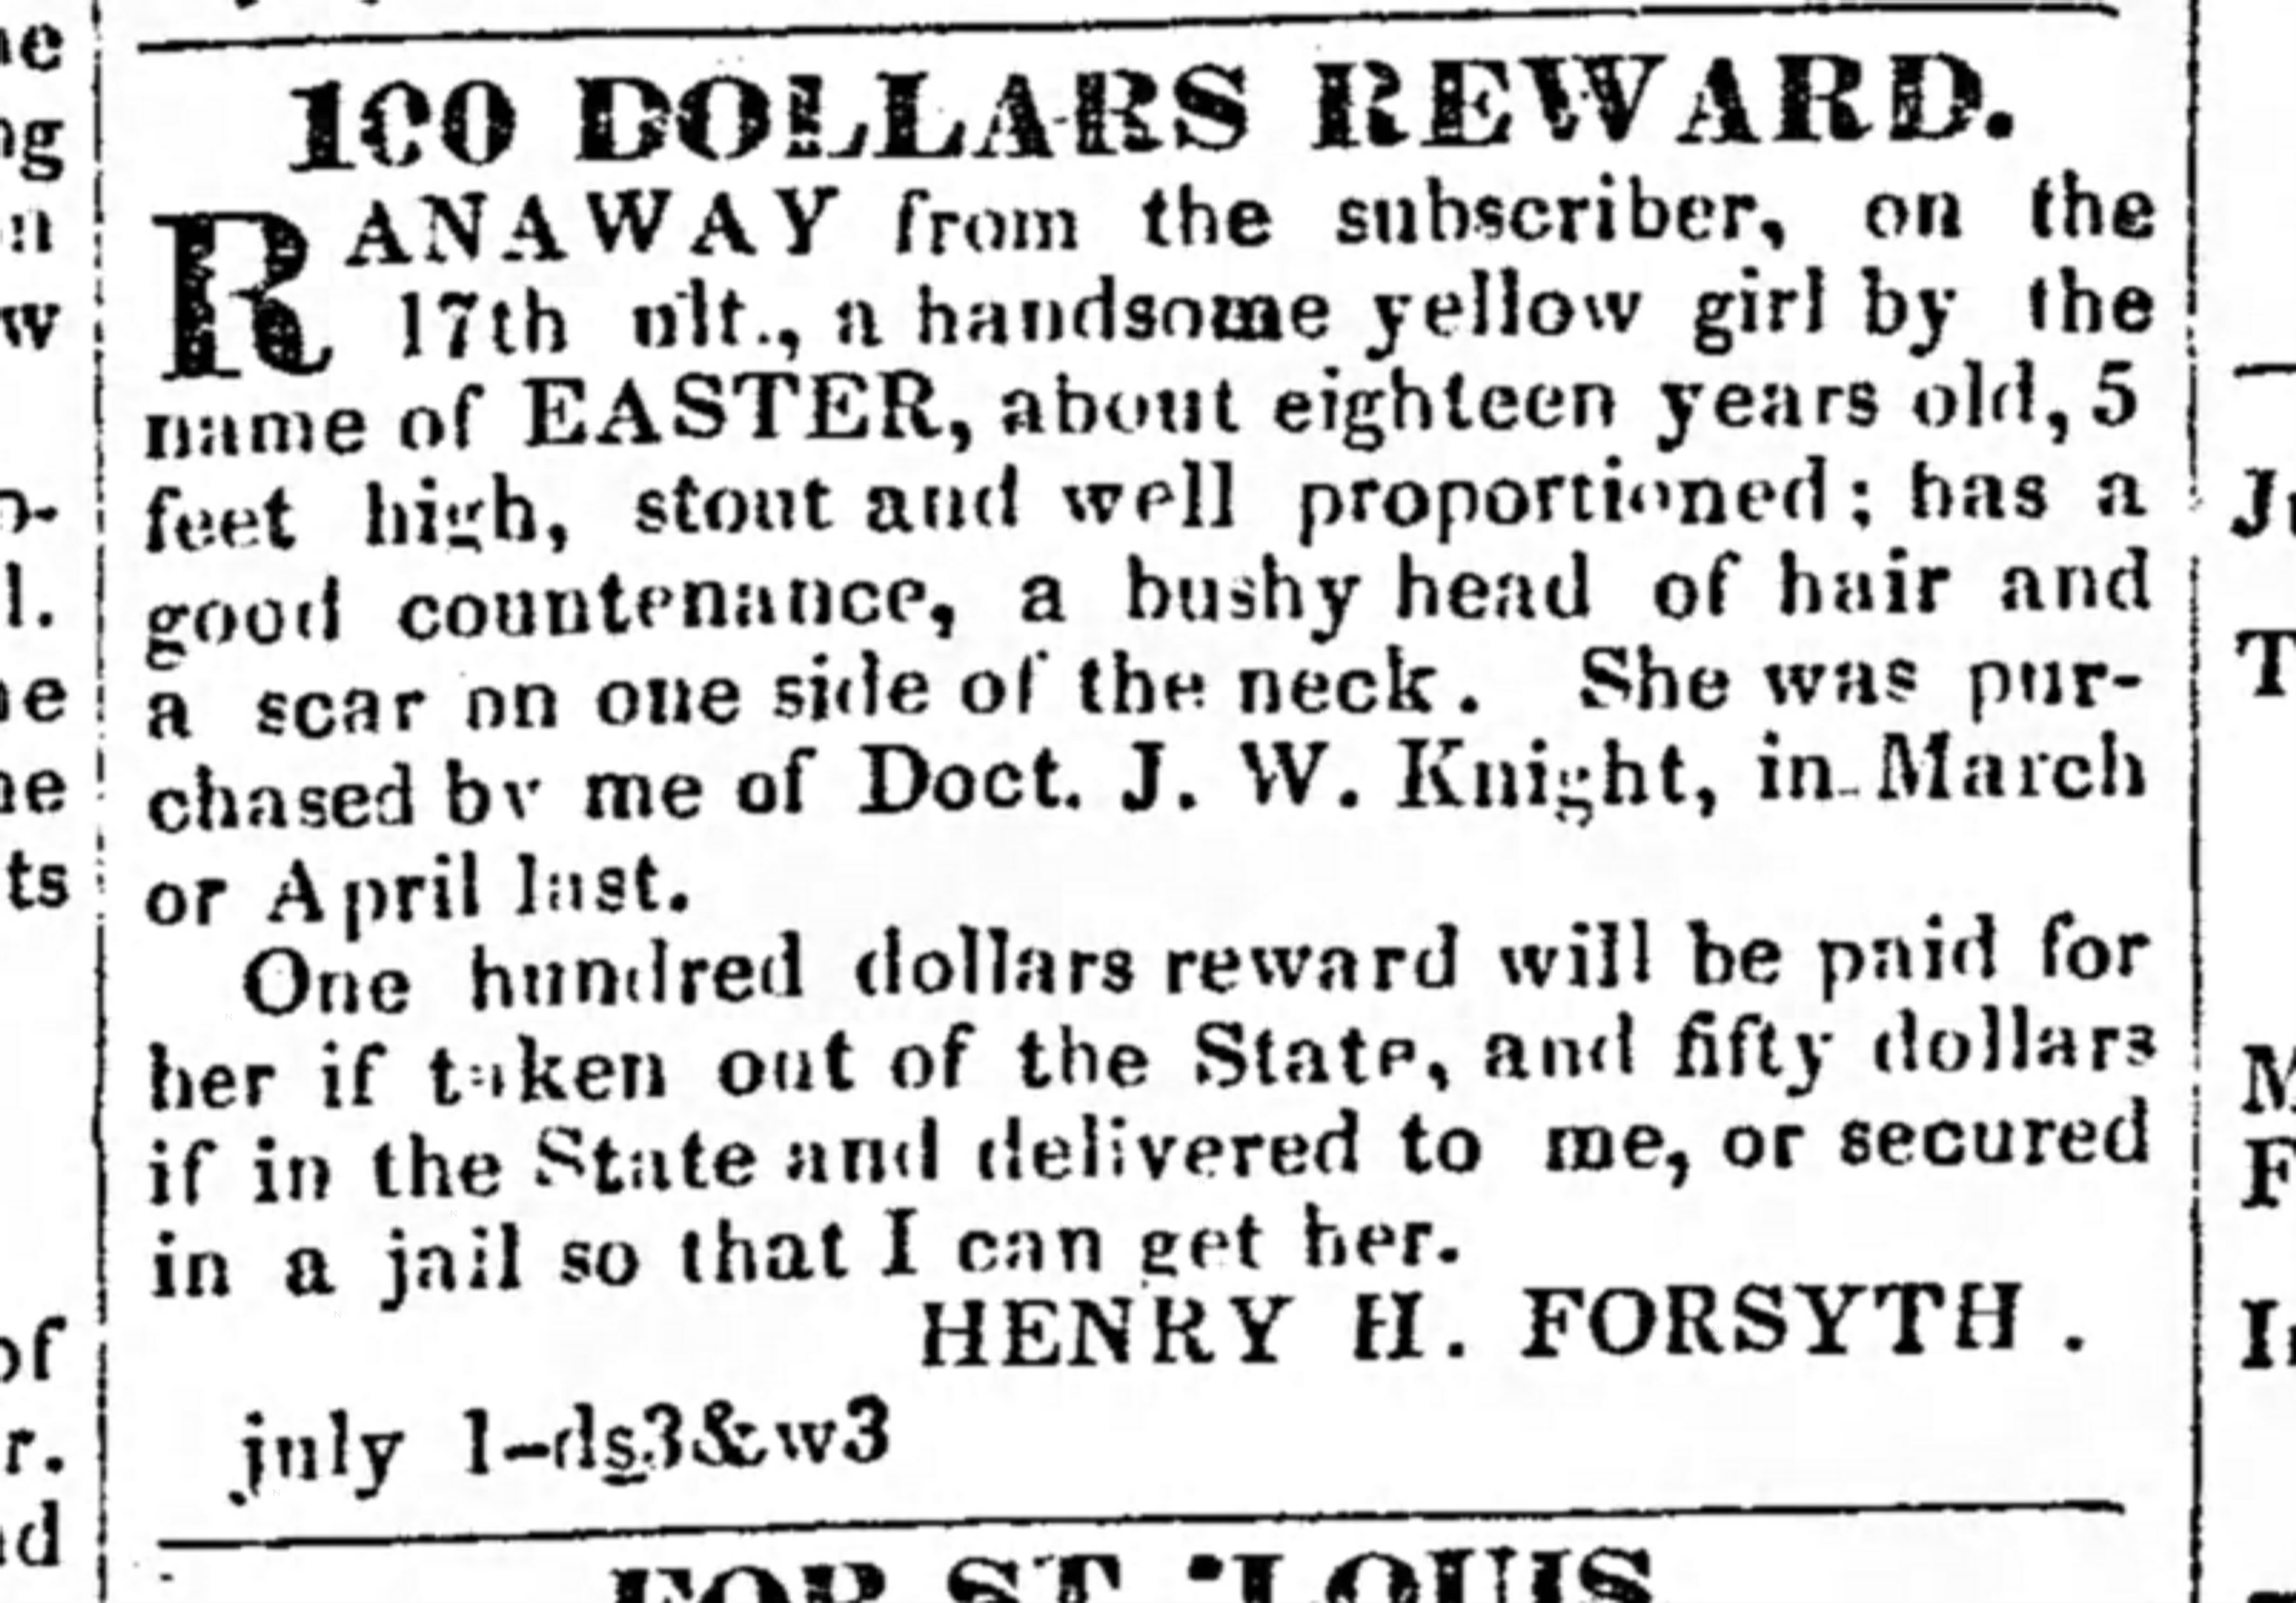 A runaway ad in the July 1, 1836, issue of the Louisville Courier Journal, placed by Henry Forsyth.